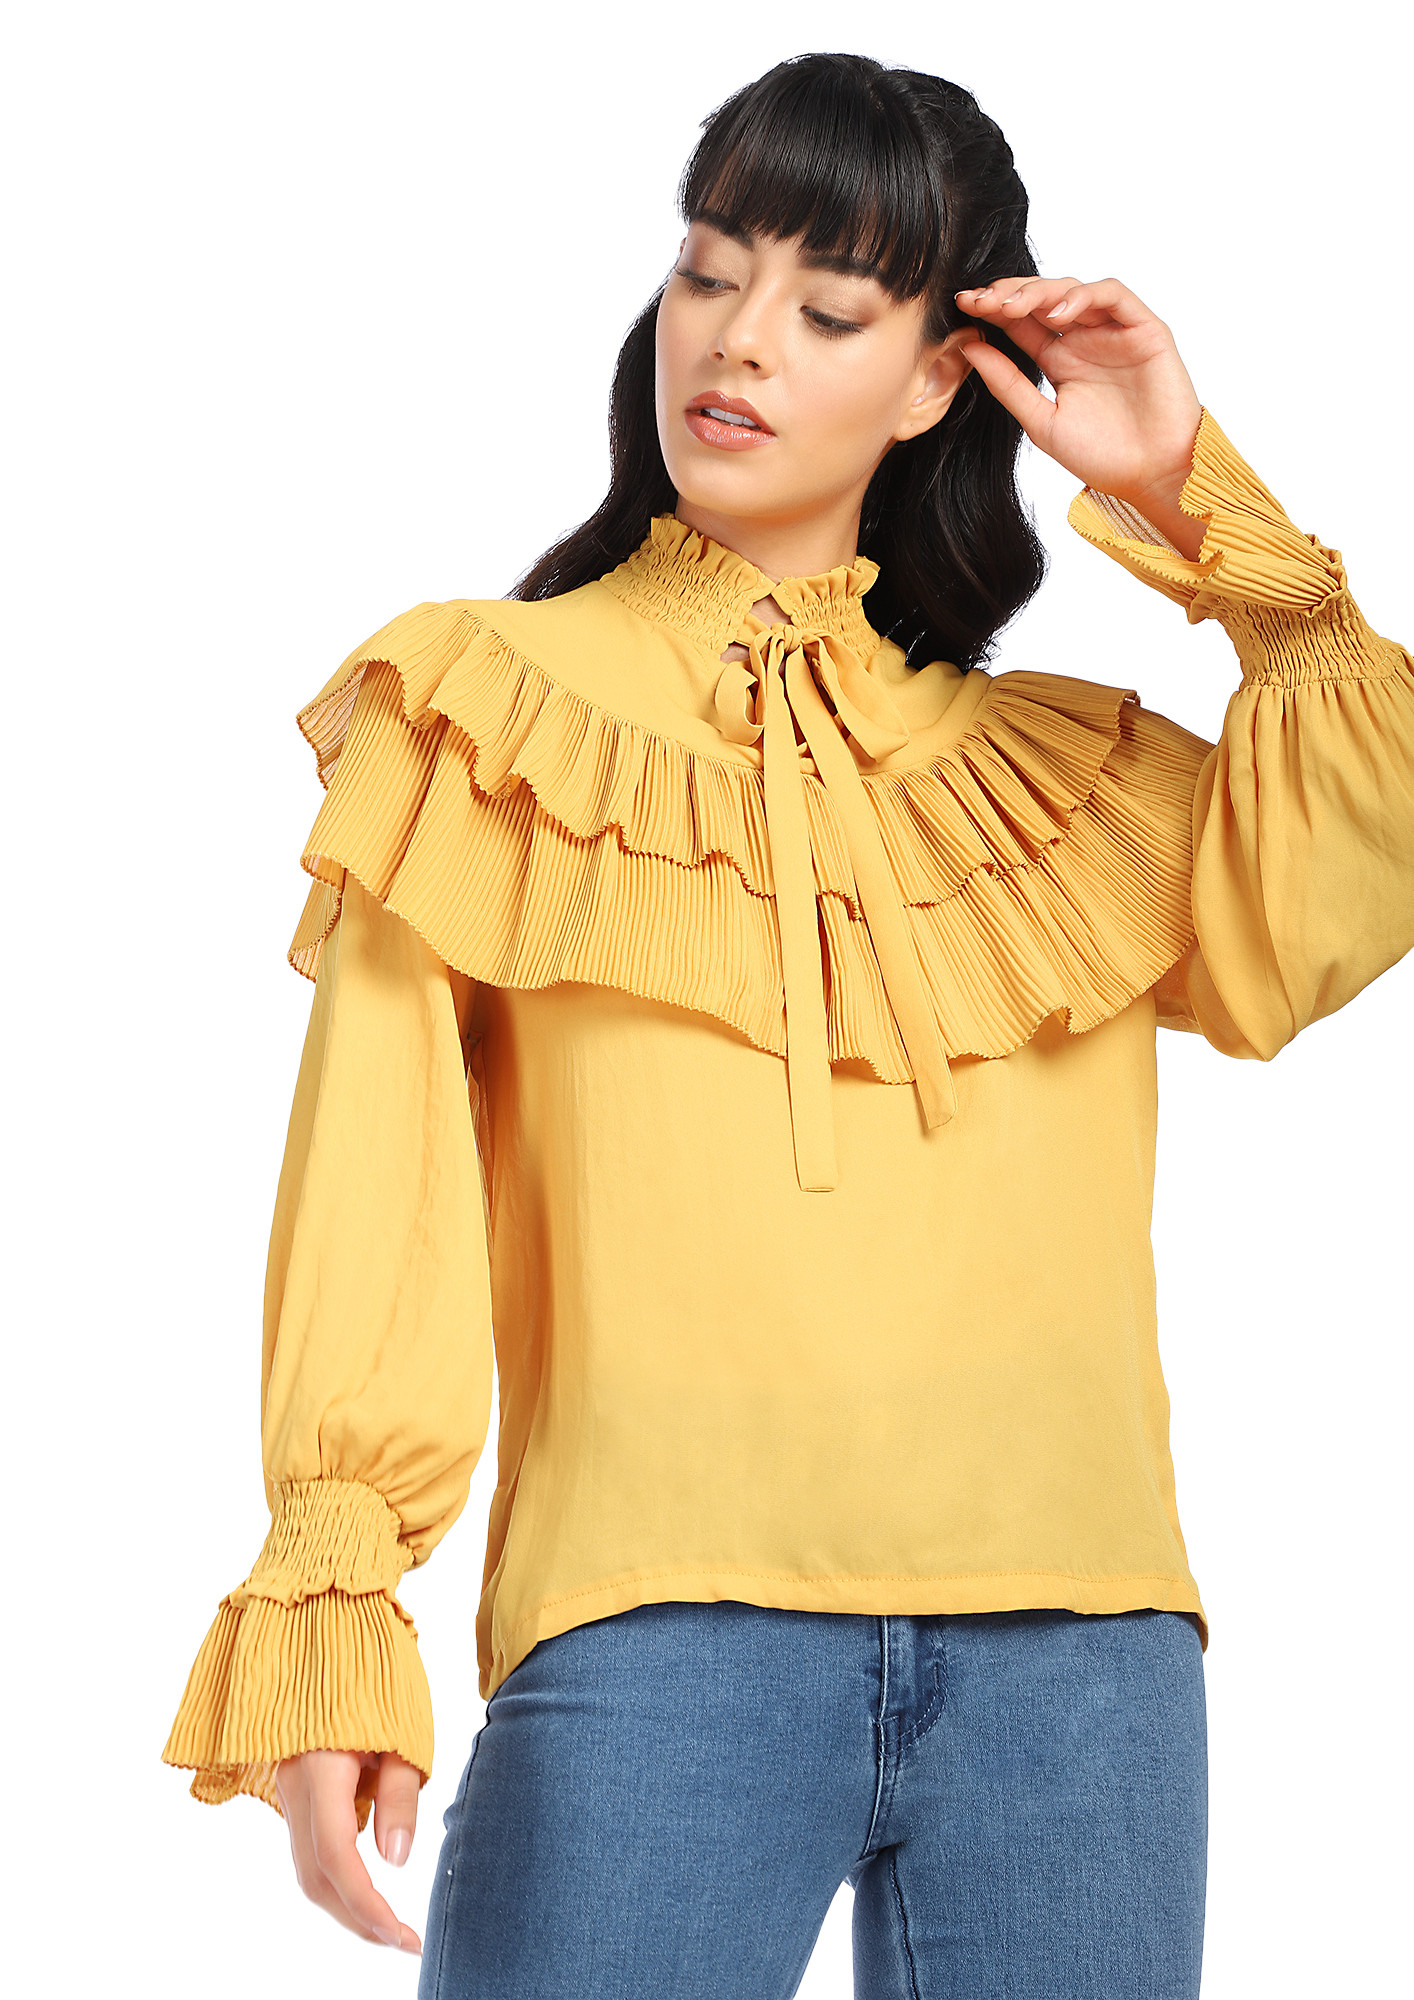 GO WITH THE FLOW YELLOW TOP